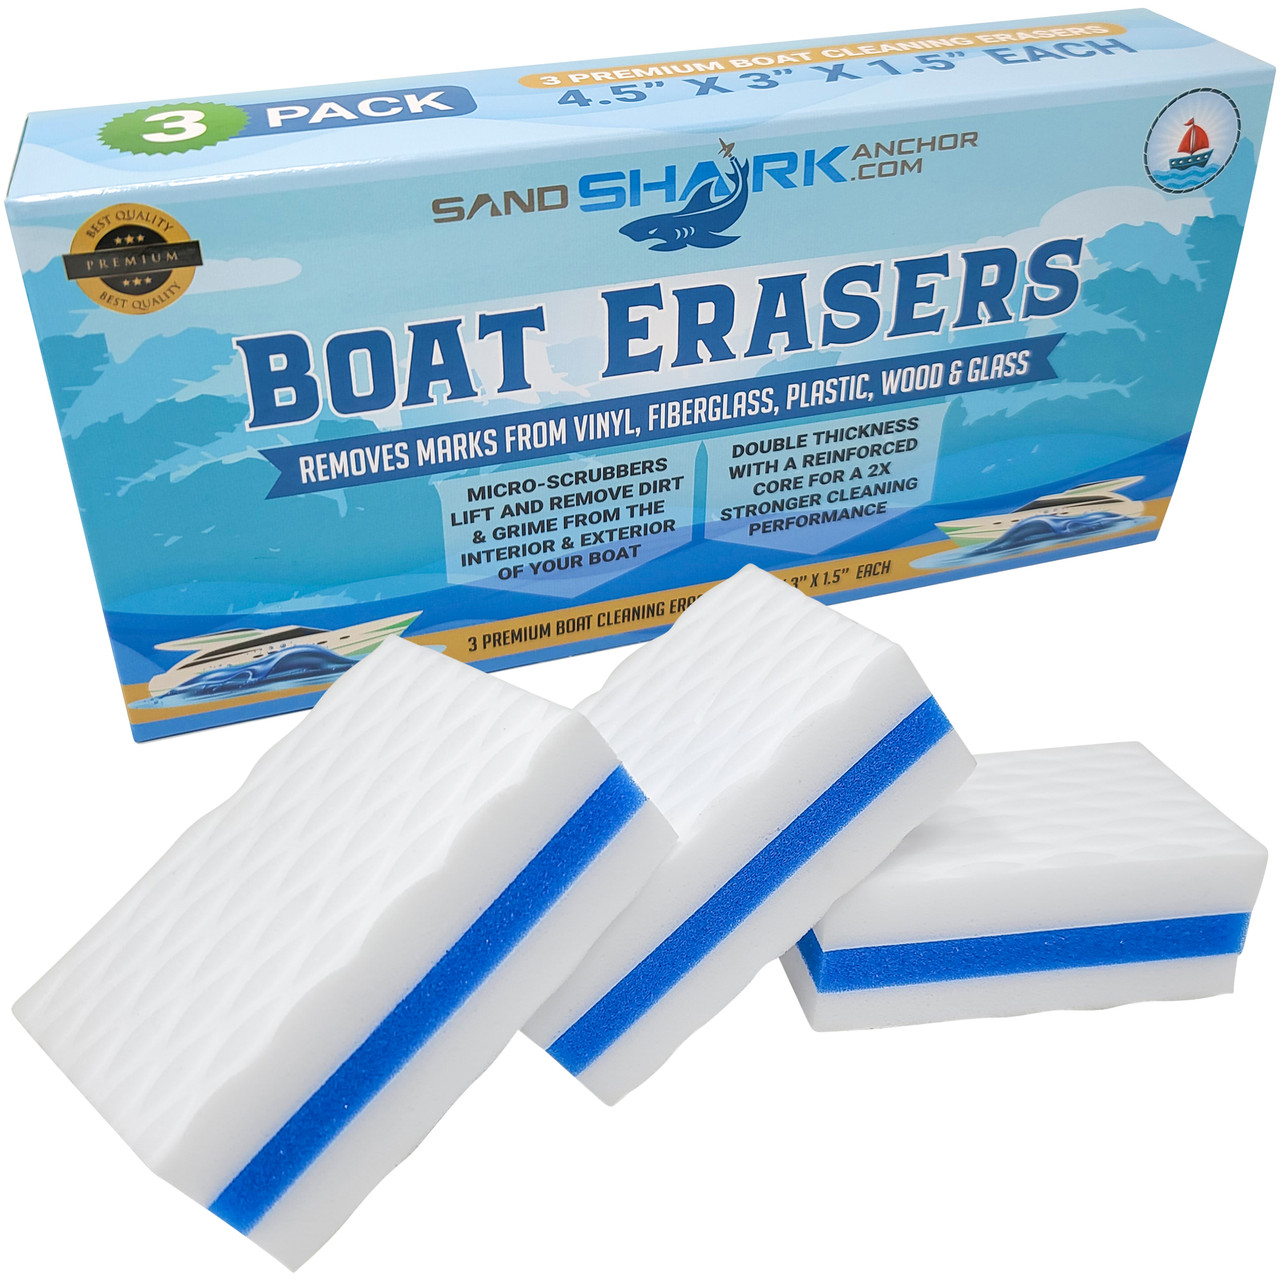 Premium Boat Erasers 3 Pack Removes Scuffs Marks Dirt & Grime Magically  from Fiberglass Gelcoat Plastic Vinyl Great Gift Idea